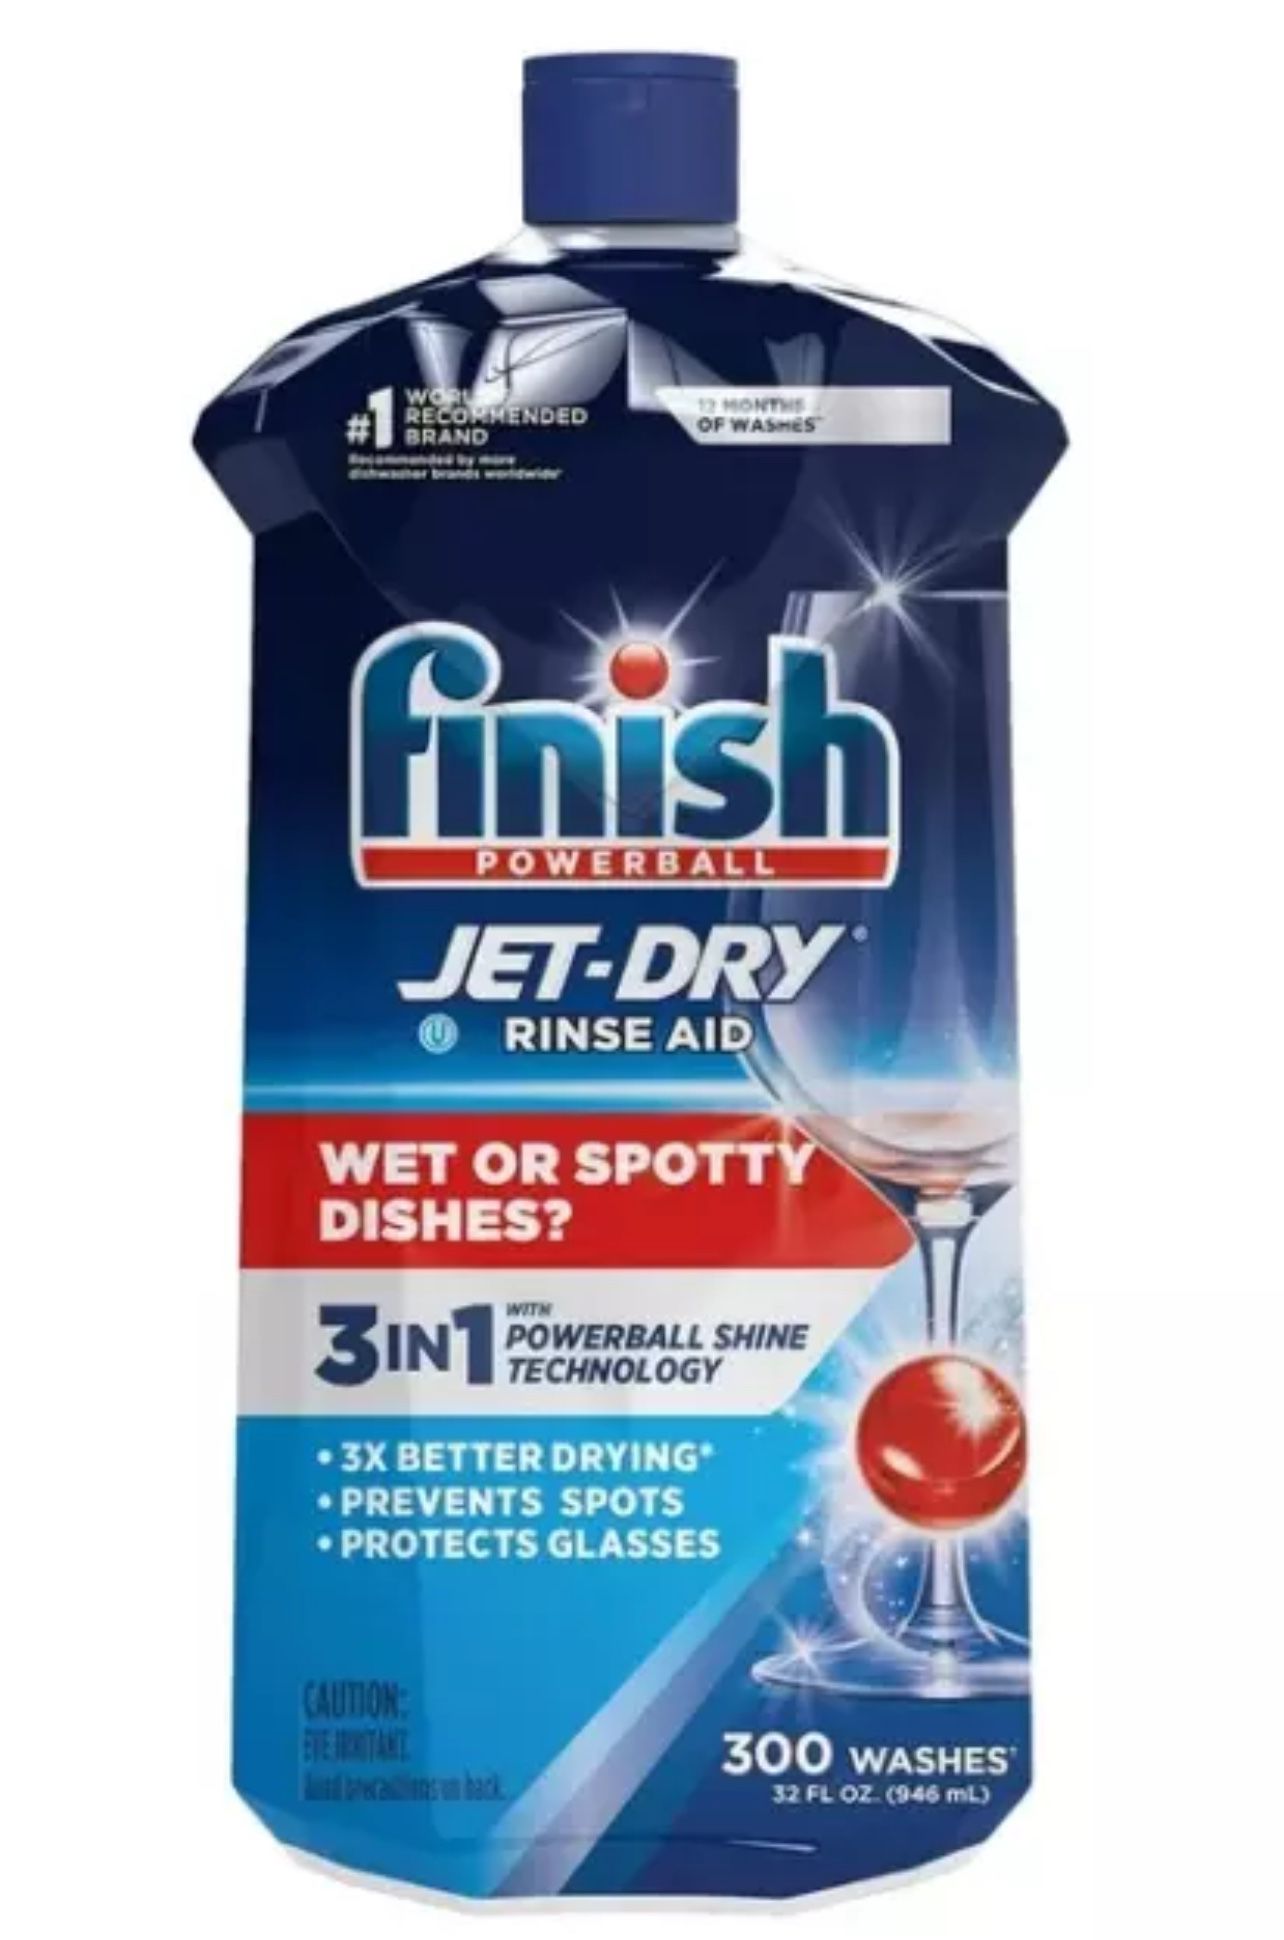 🔥Finish Jet-Dry Rinse Aid Dishwasher Drying Agent 3IN1 QUANTUM POWERBALL 32 OZ